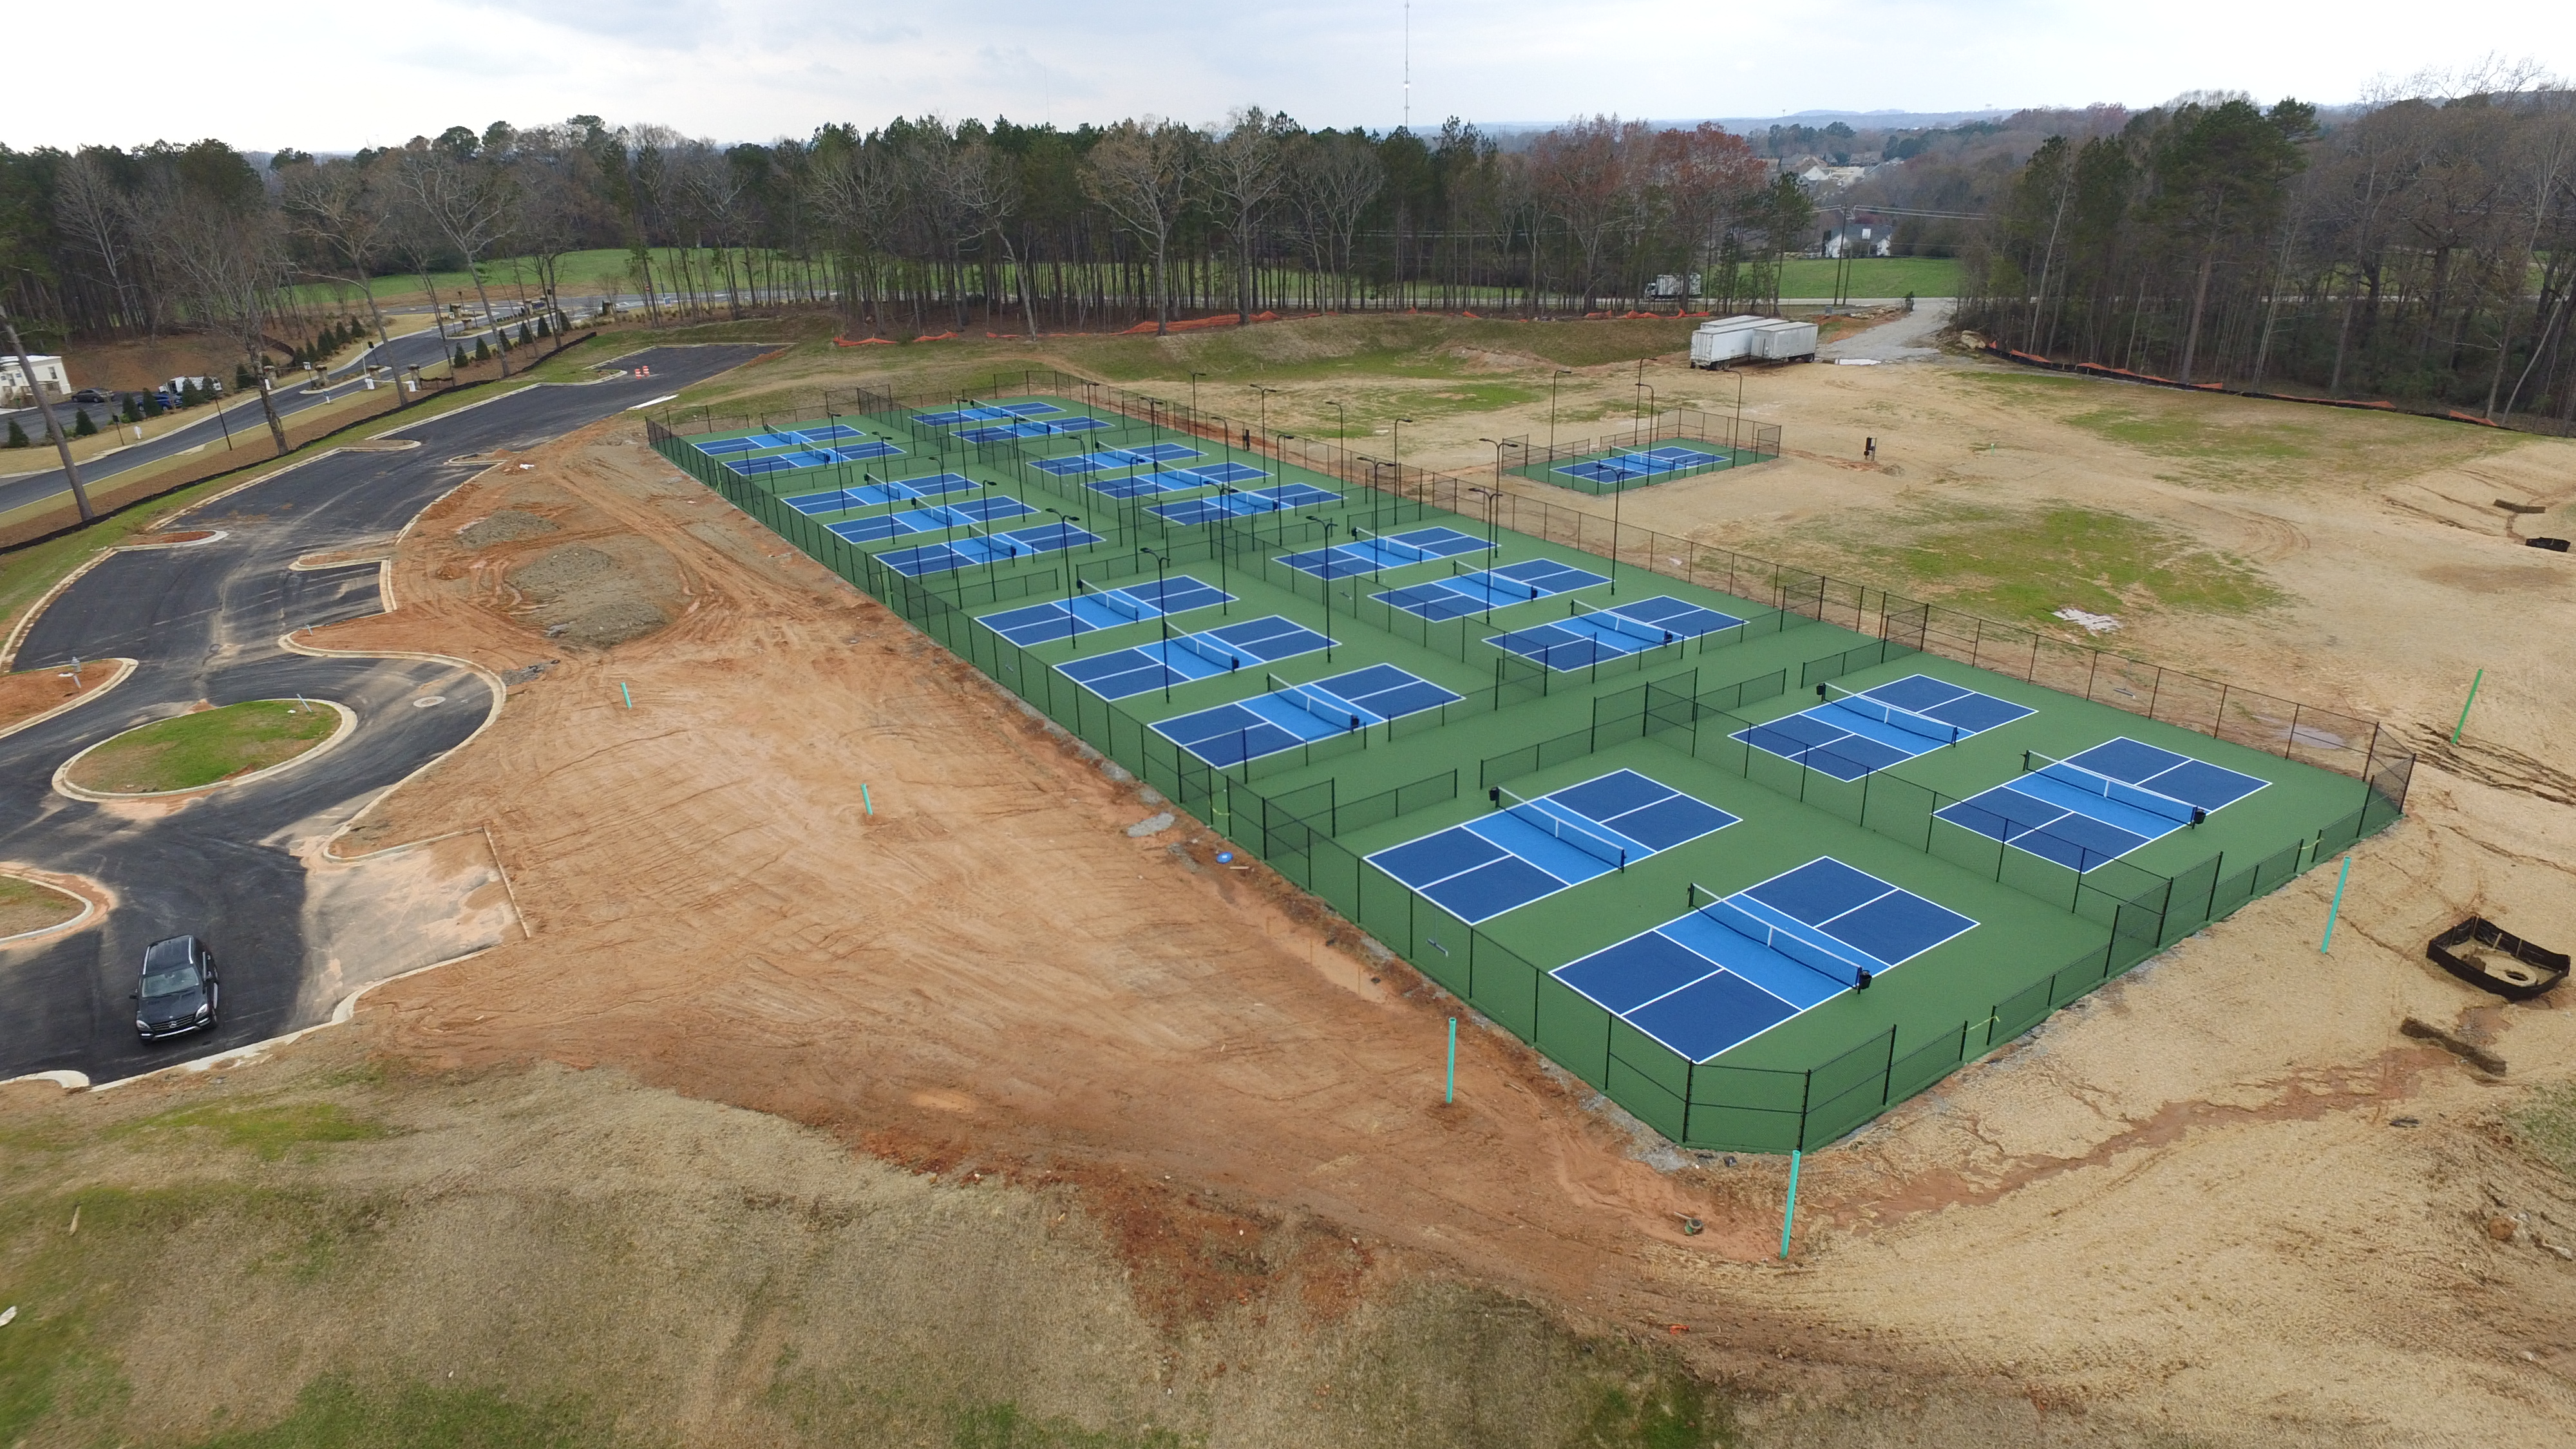 First Phase of Pickleball Center at Cresswind Georgia Nears Completion